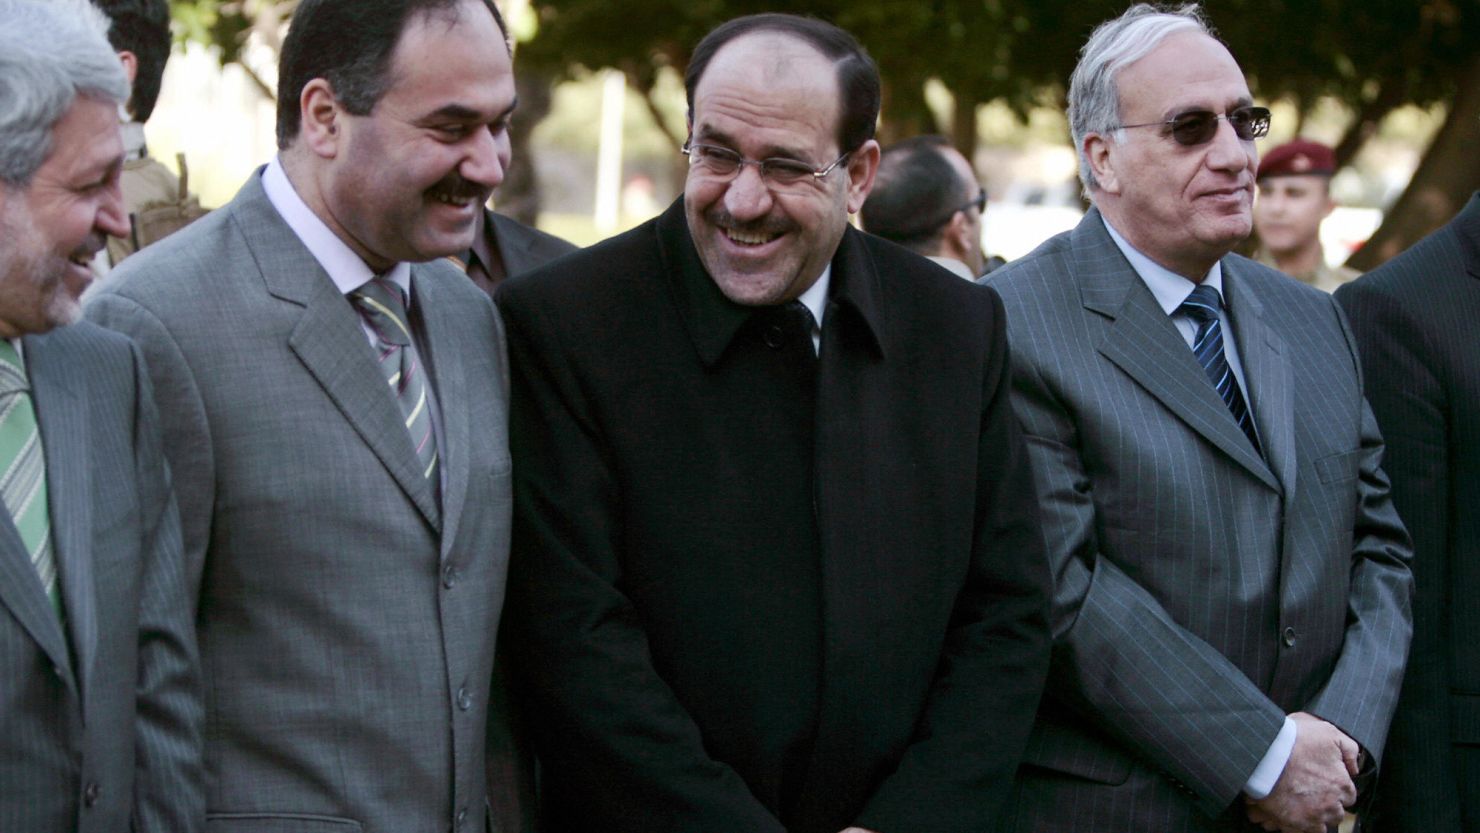 Iraqi Finance Minister Rafei al-Essawi is shown second from left, next to Prime Minister Nuri al-Maliki, in 2008. 